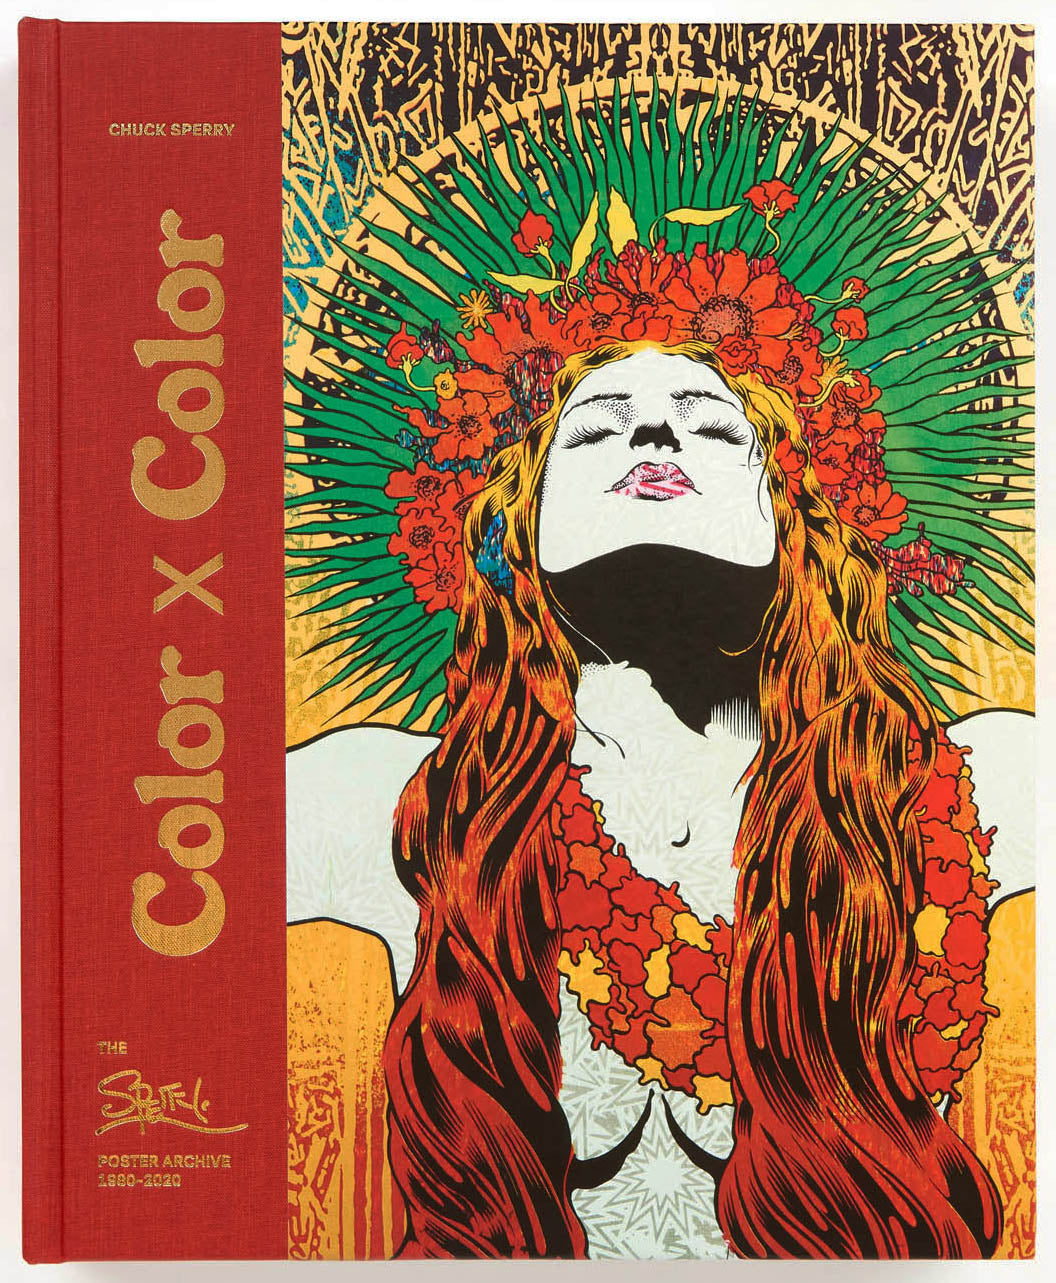 Books by Chuck Sperry titled Chuck Sperry: "Color X Color"